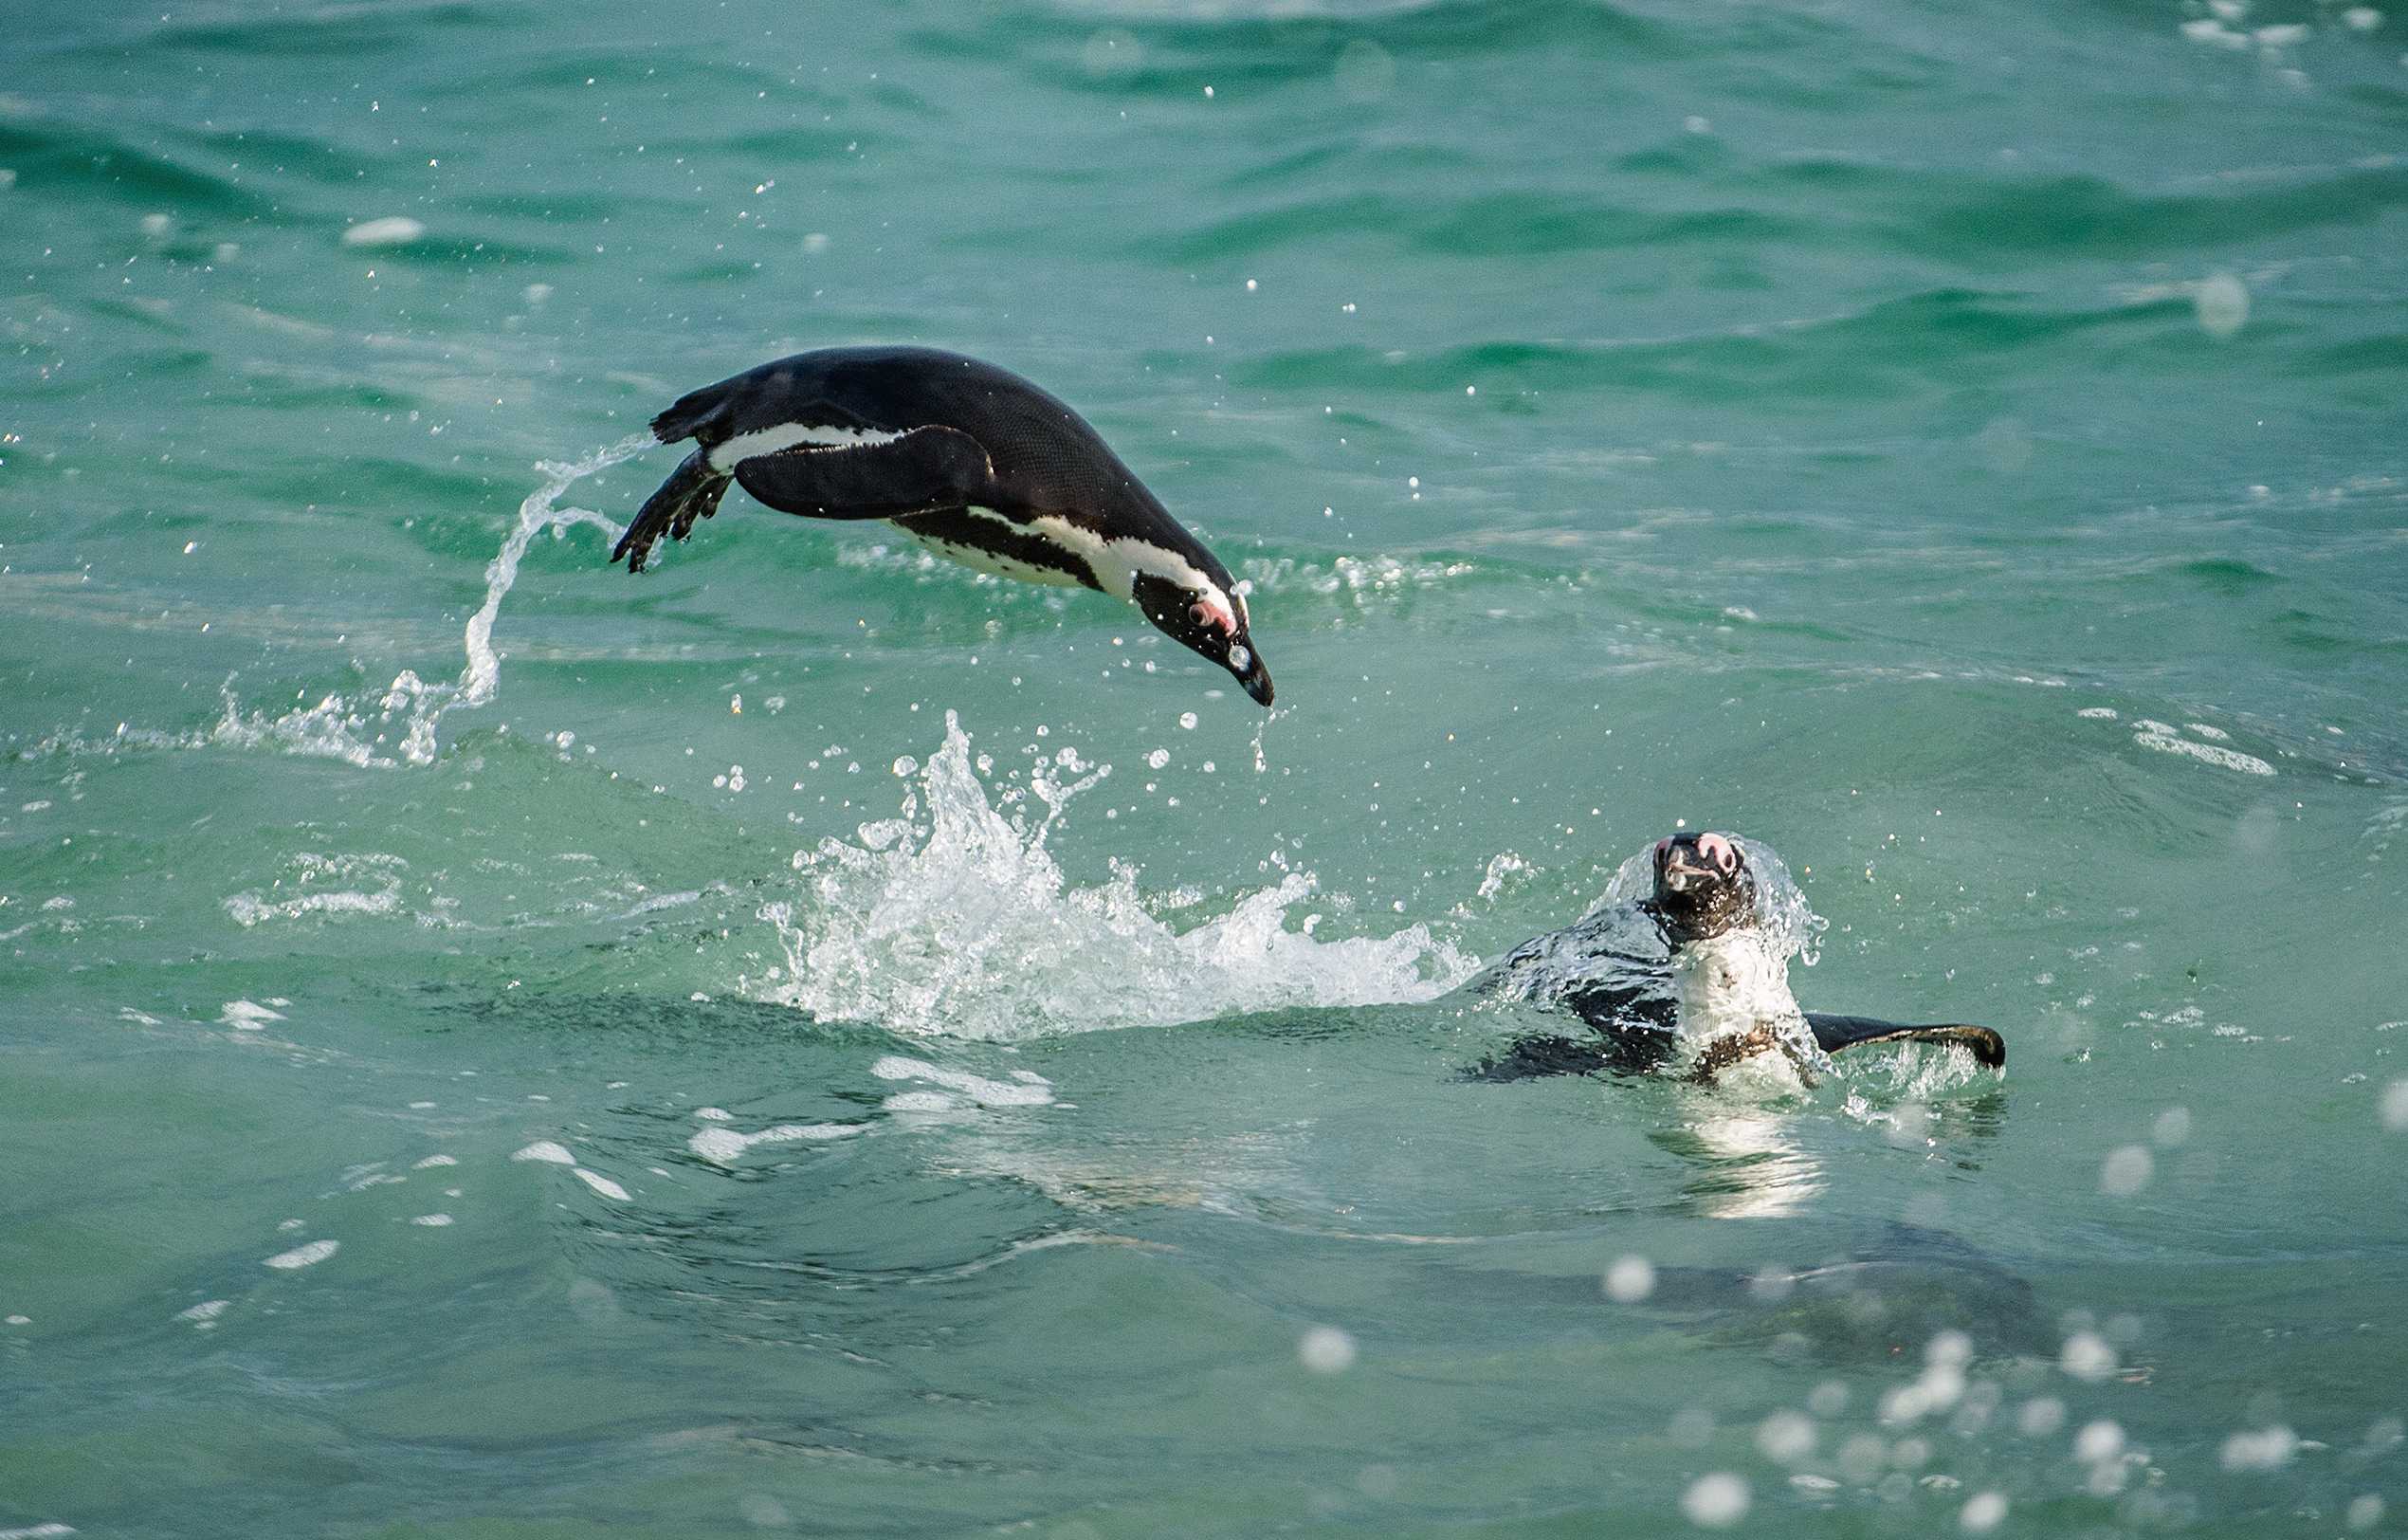 The African Penguin's Struggle for Survival